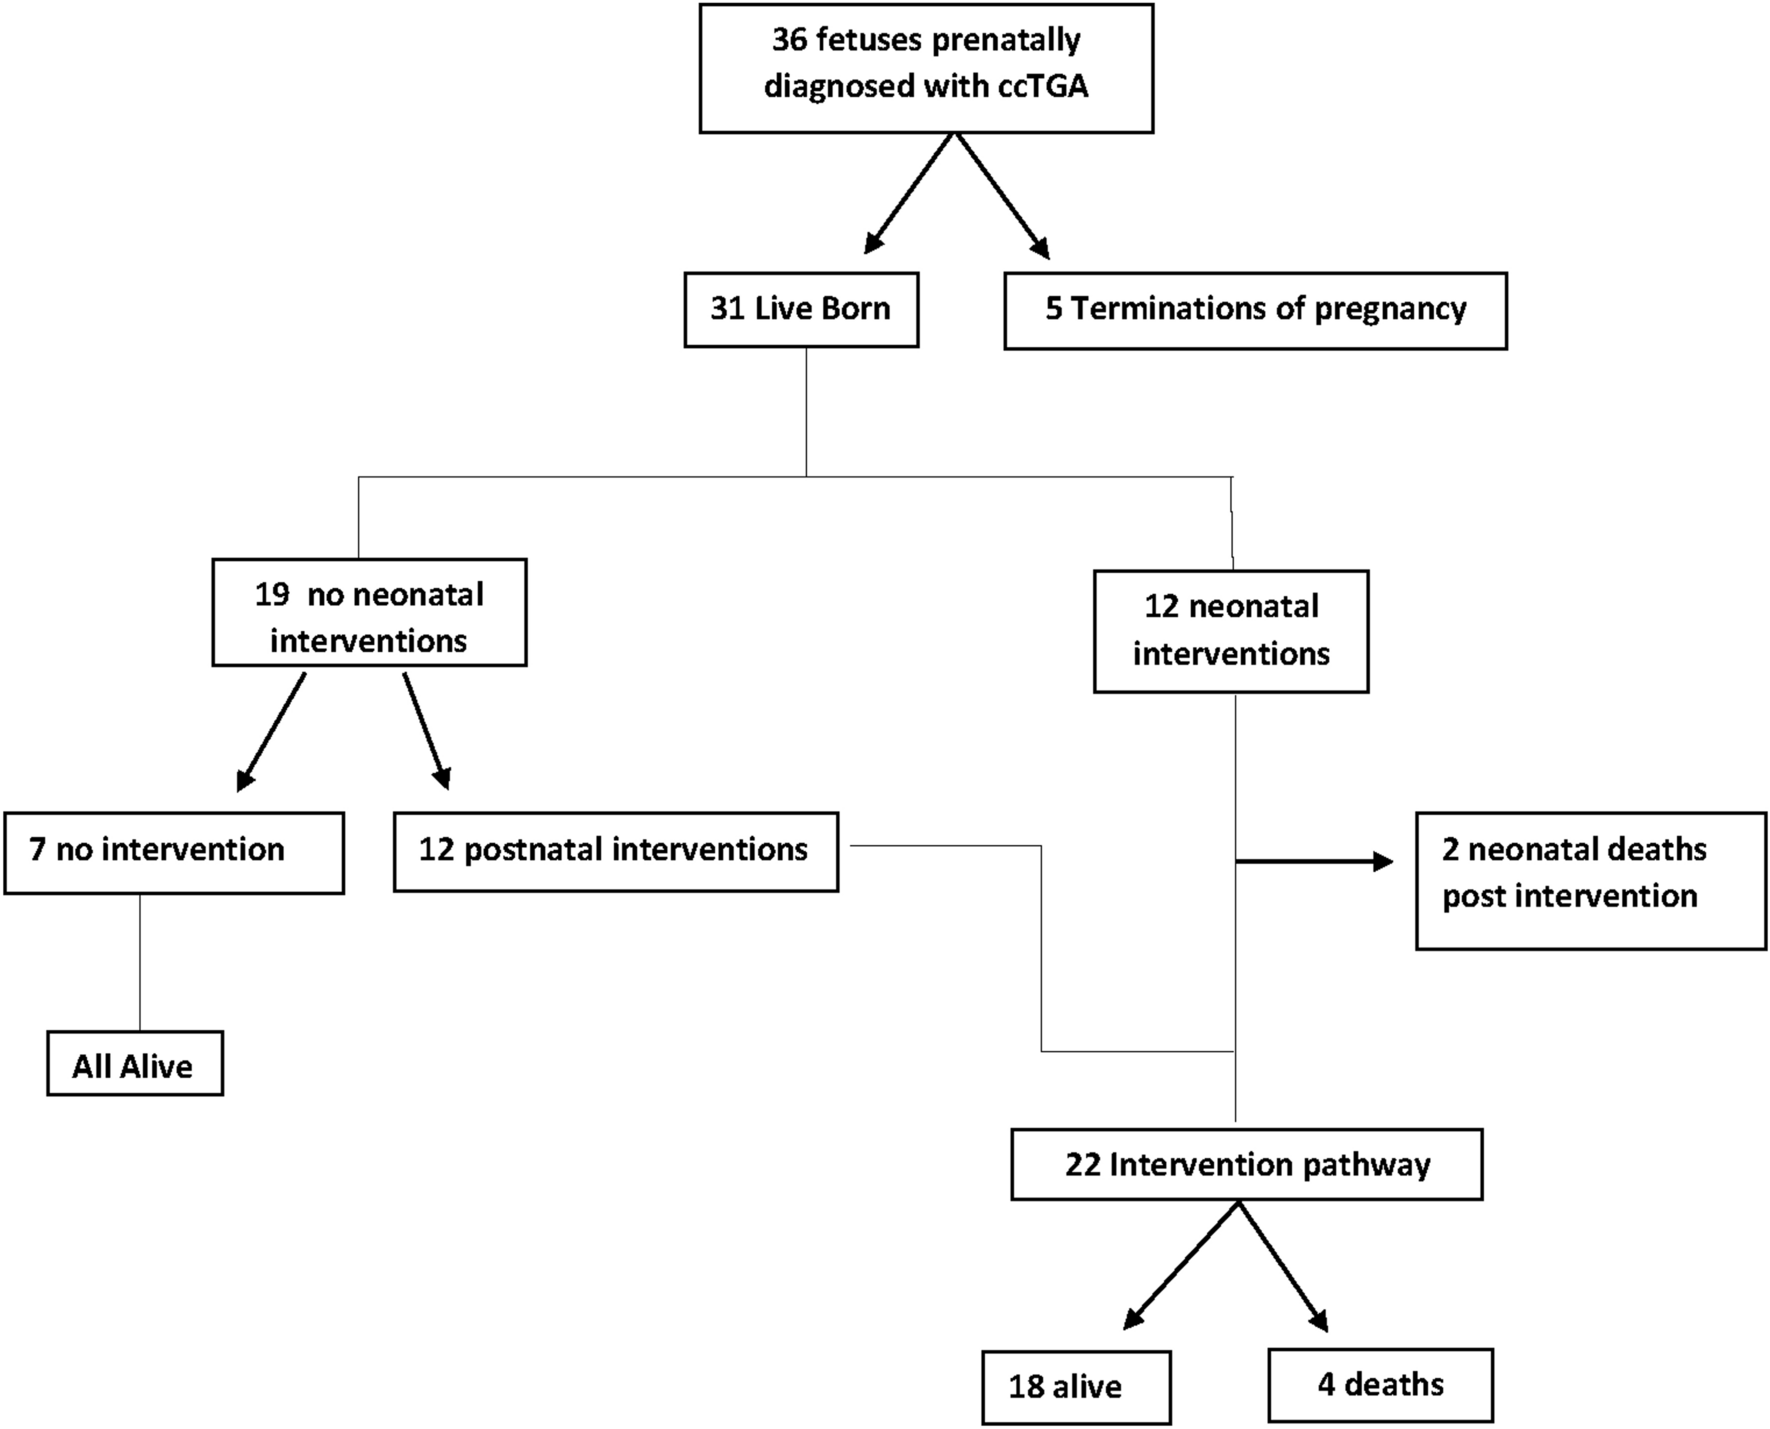 Congenitally Corrected Transposition of the Great Arteries in Utero: Morphological Spectrum, Outcomes and Pitfalls in Fetal Diagnosis